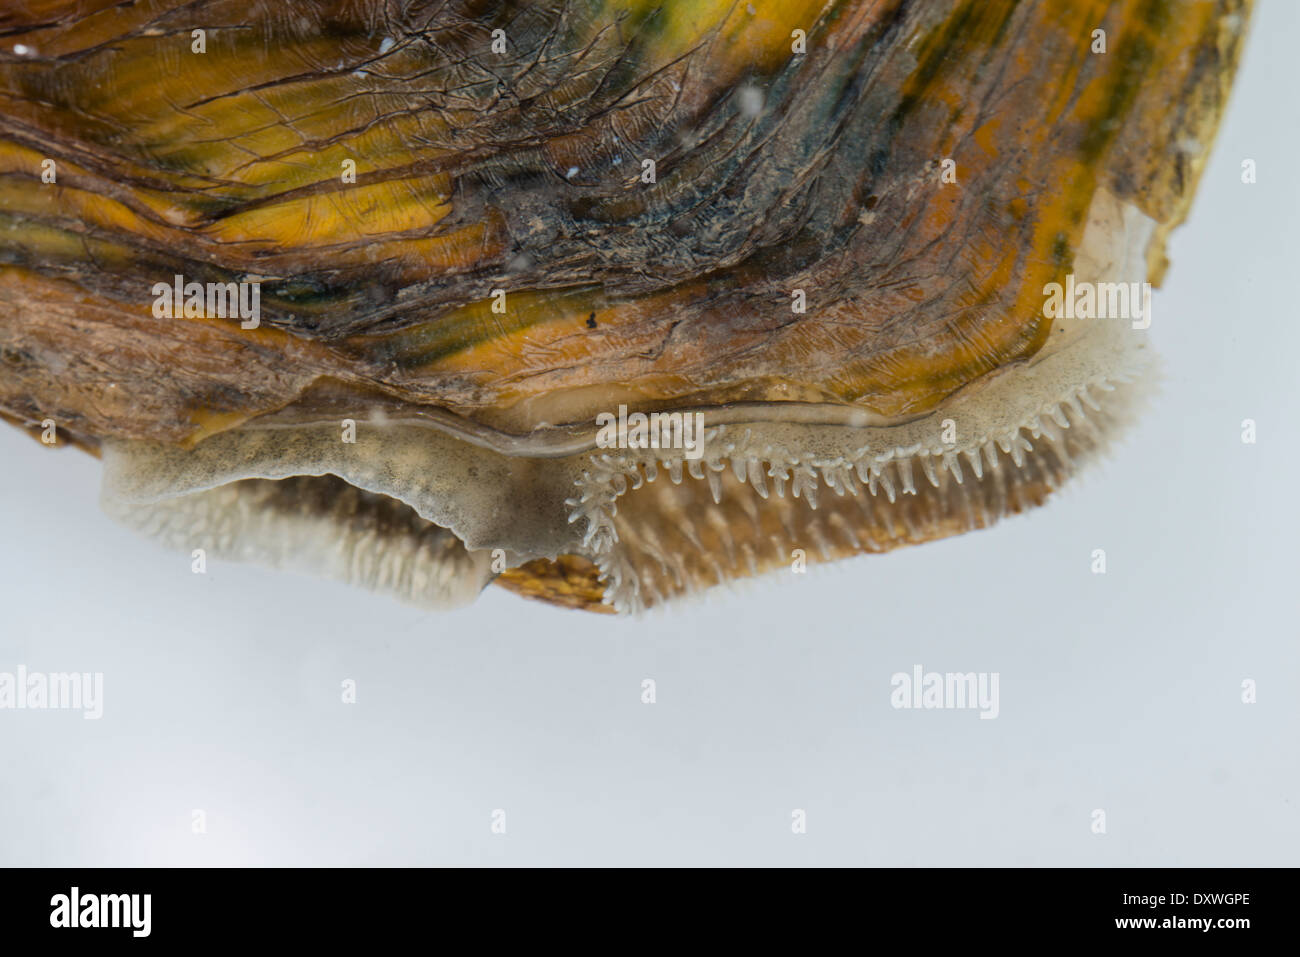 Siphon of Chinese Pond Mussel (Sinanodonta woodiana), large freshwater mussel which is an invasive species to Europe, spain Stock Photo